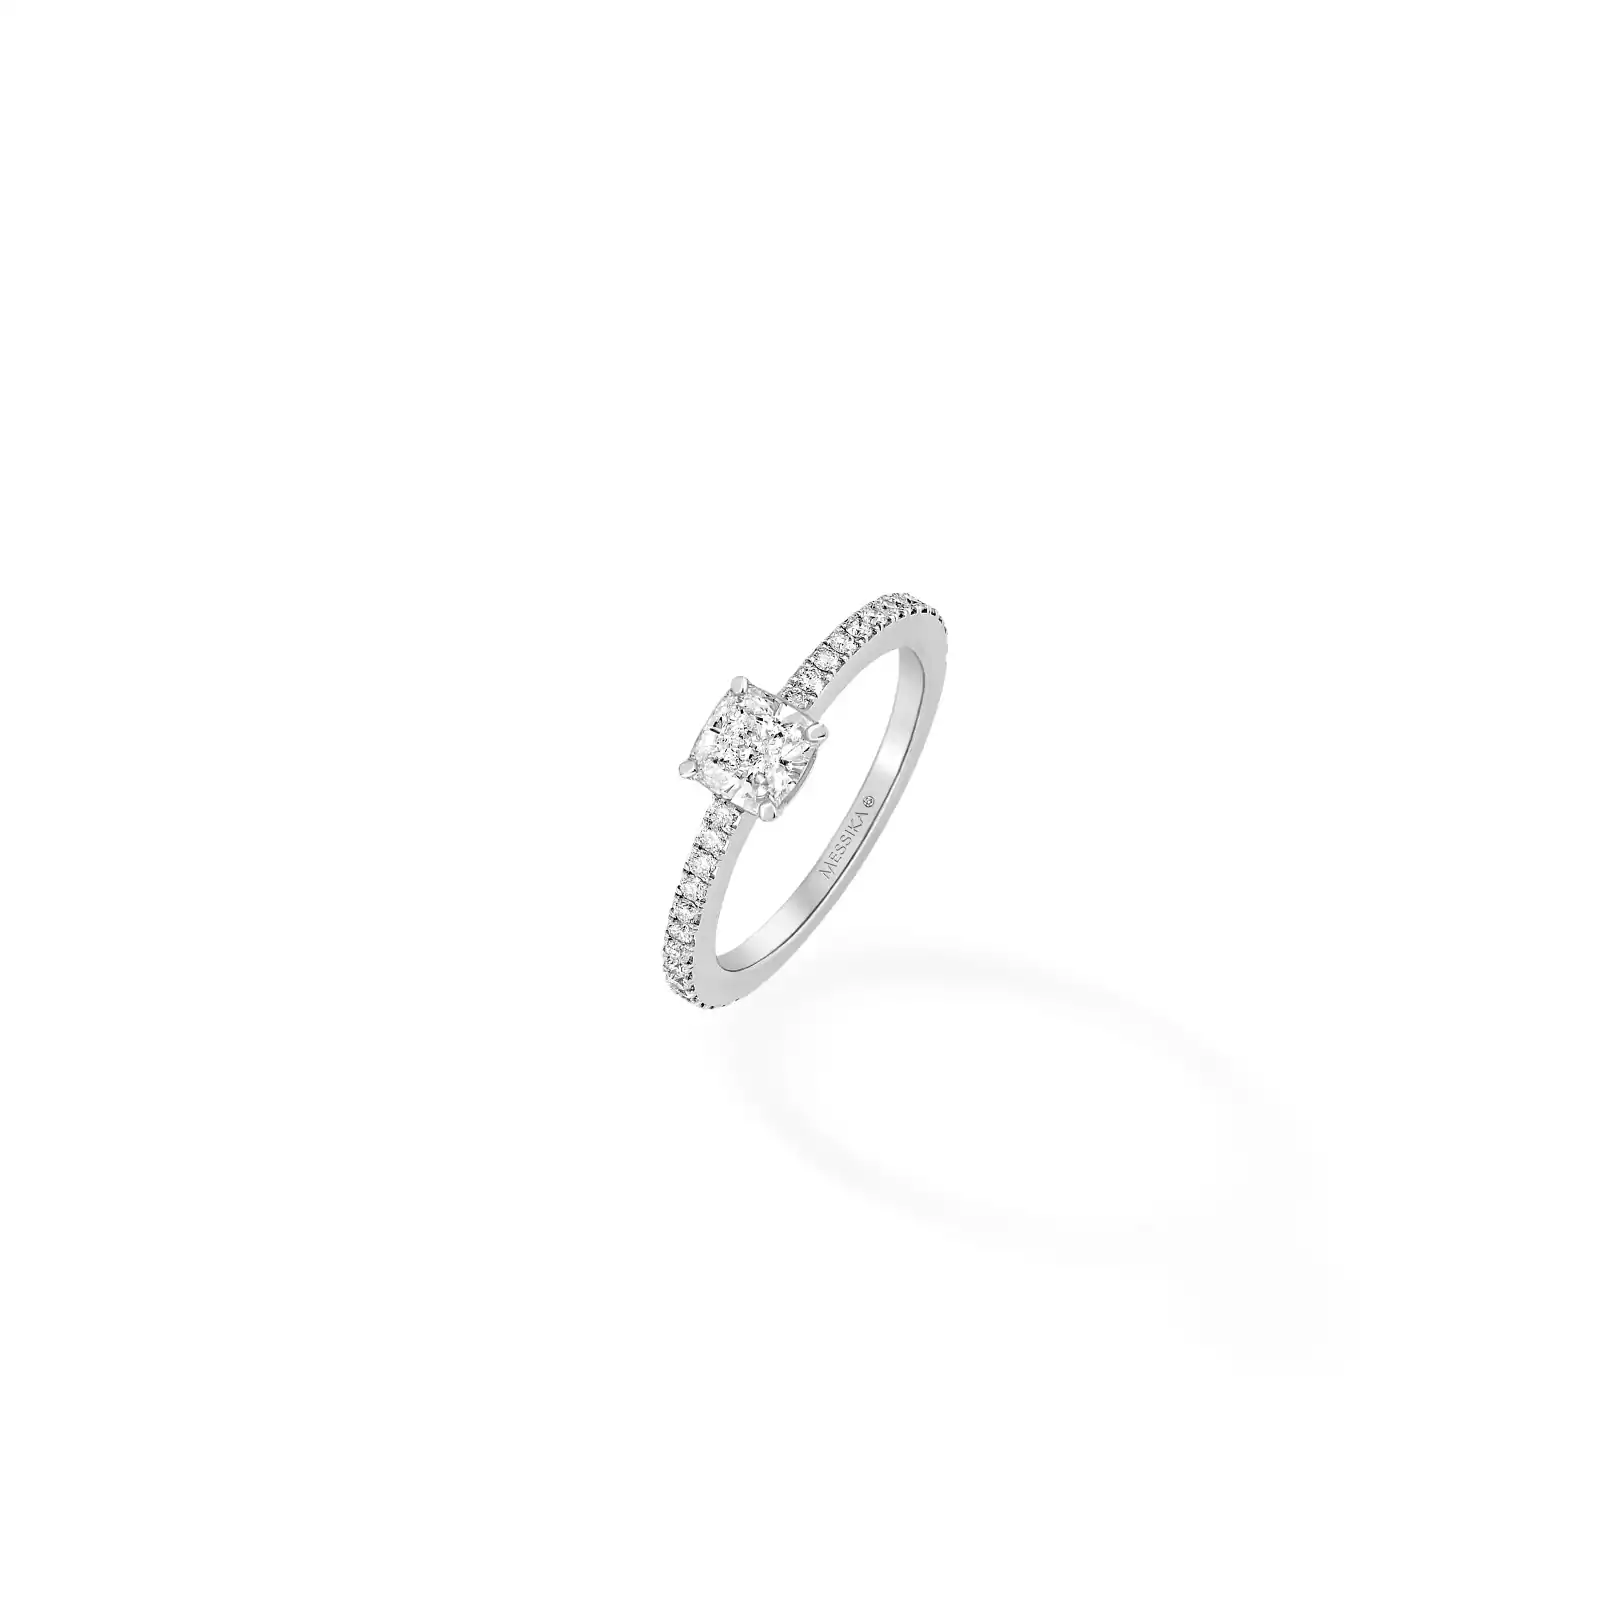 Solitaire Coussin Pavé White Gold For Her Diamond Ring 08006-WG